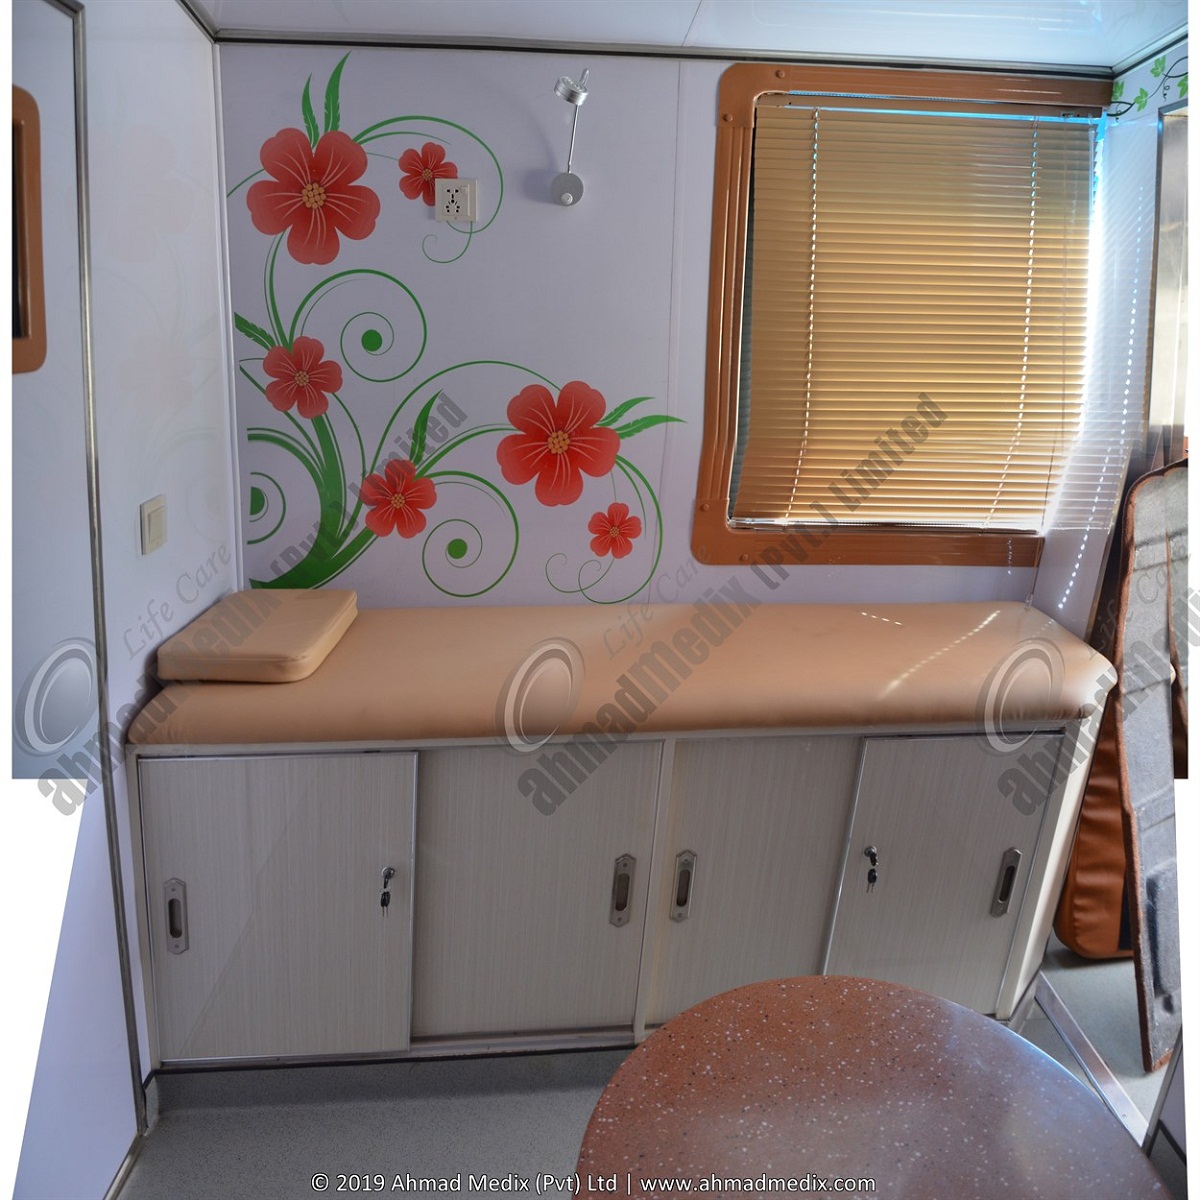 Mobile Healthcare Unit On Bus Chassis